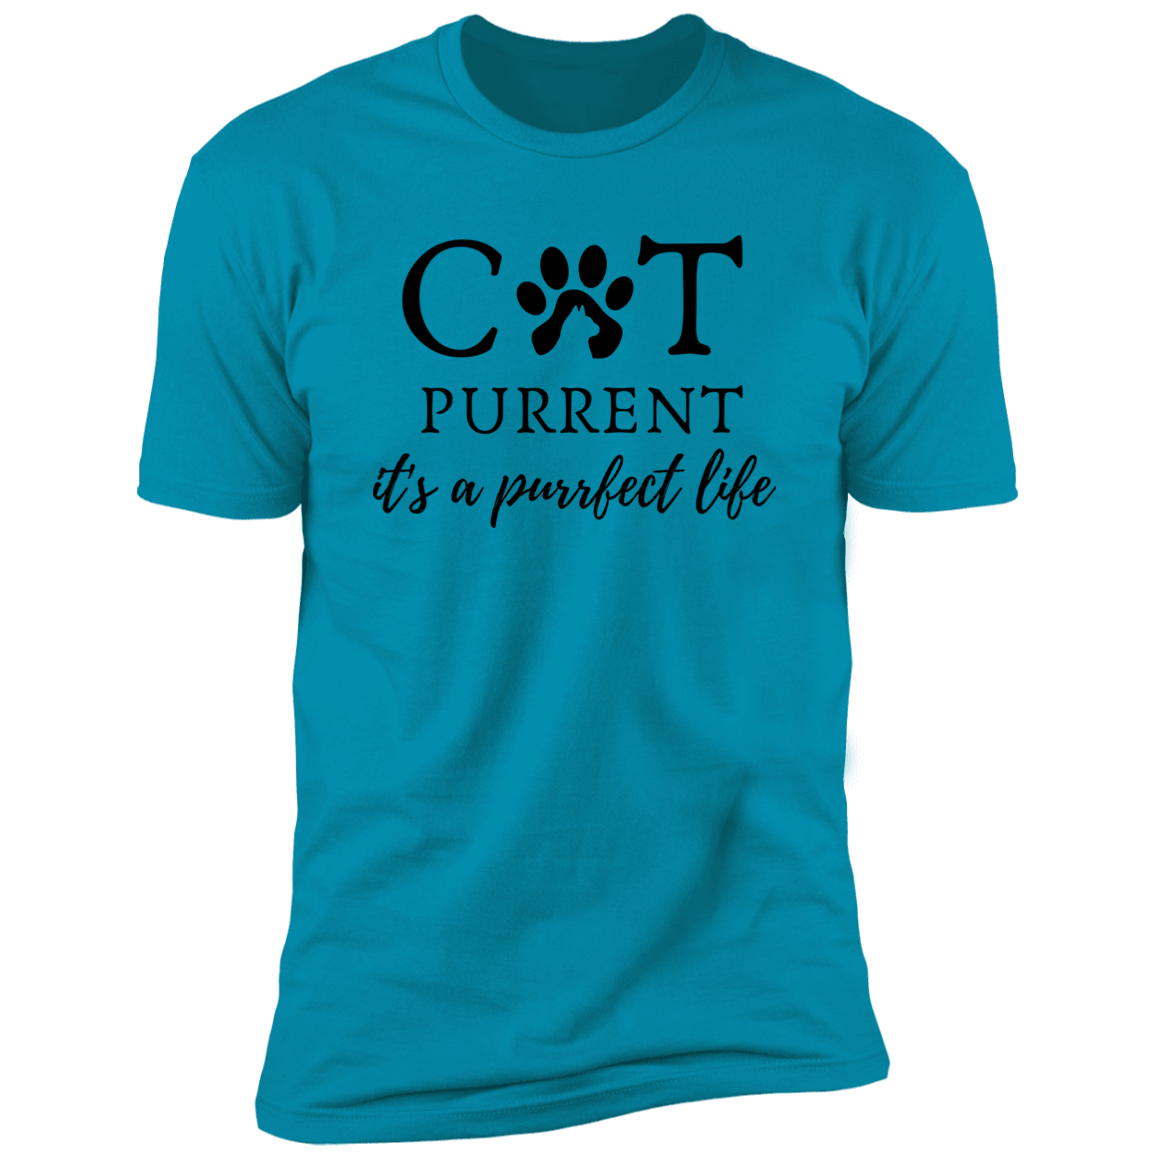 Cat Purrent It's a Purrfect Life T-shirt, Cat Parent Shirt for humans, in turquoise